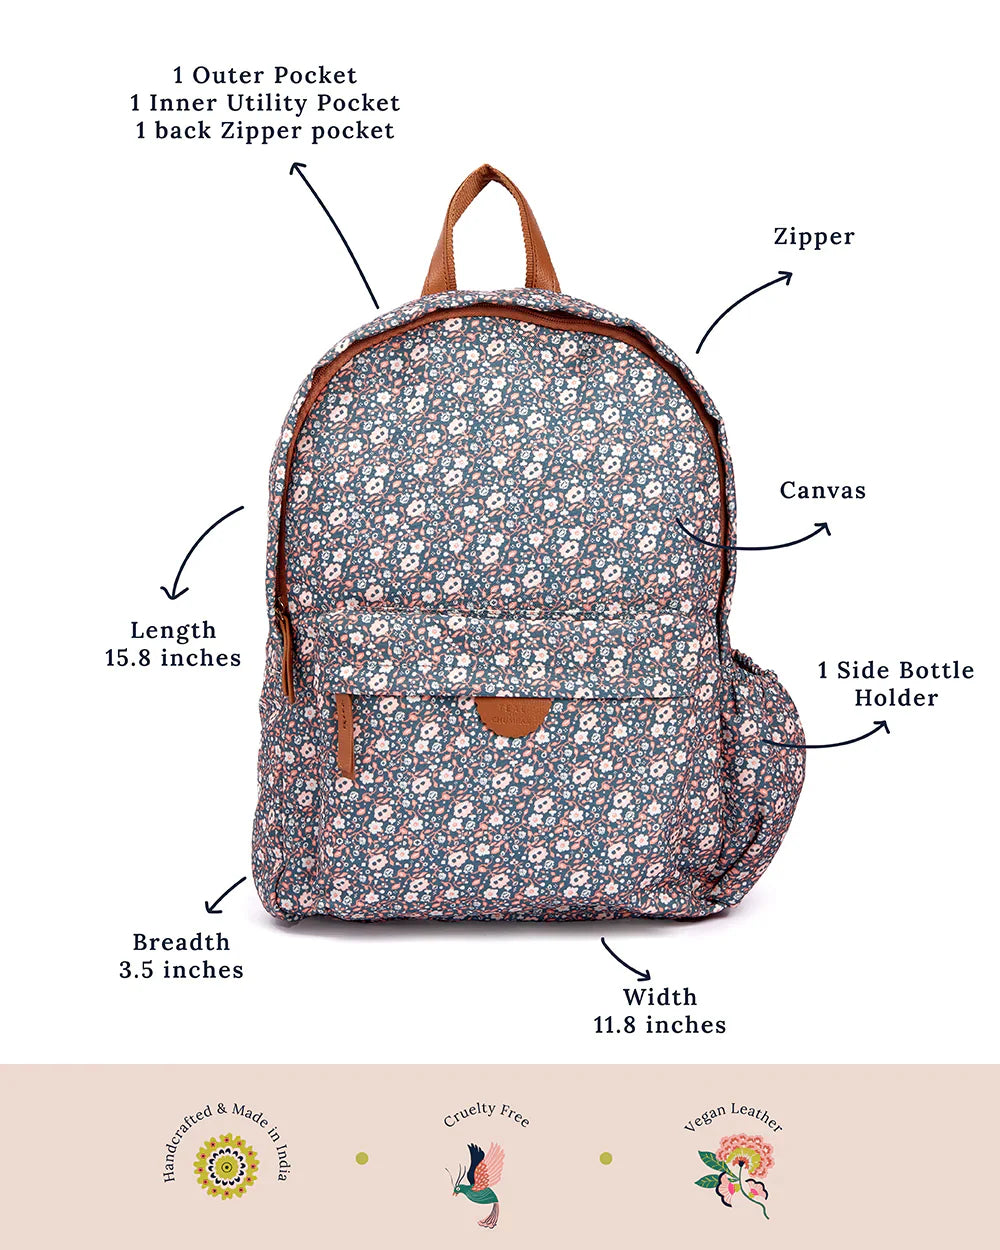 Teal By Chumbak Floral Beds Laptop Backpack - Chumbak